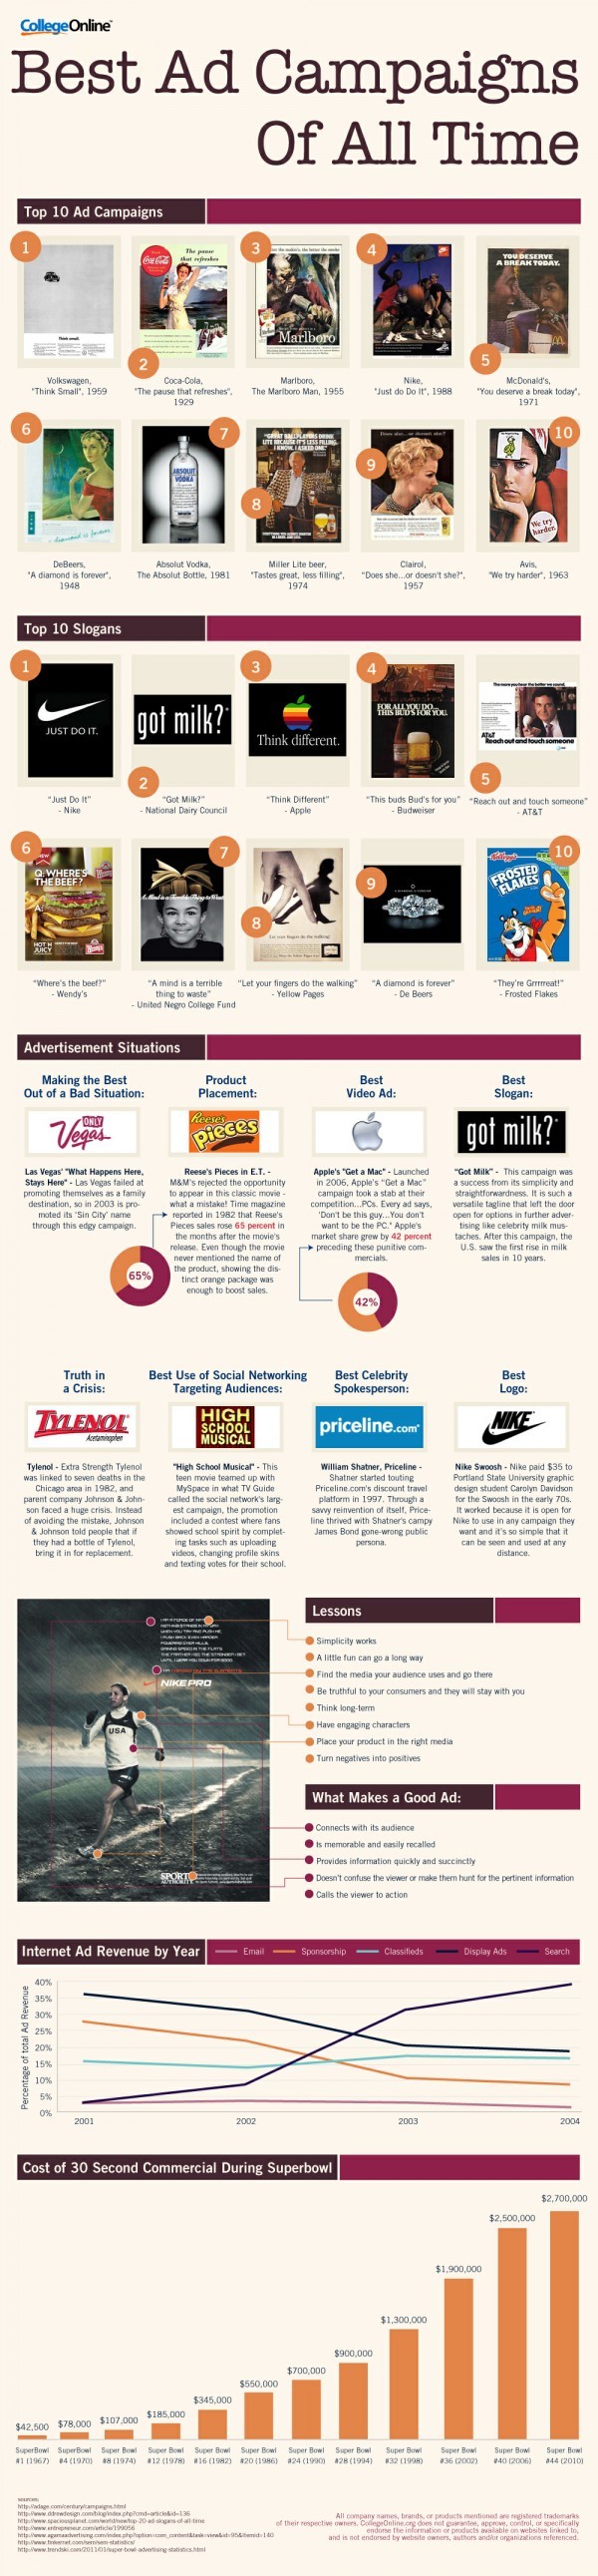 best ad campaigns [infographic]